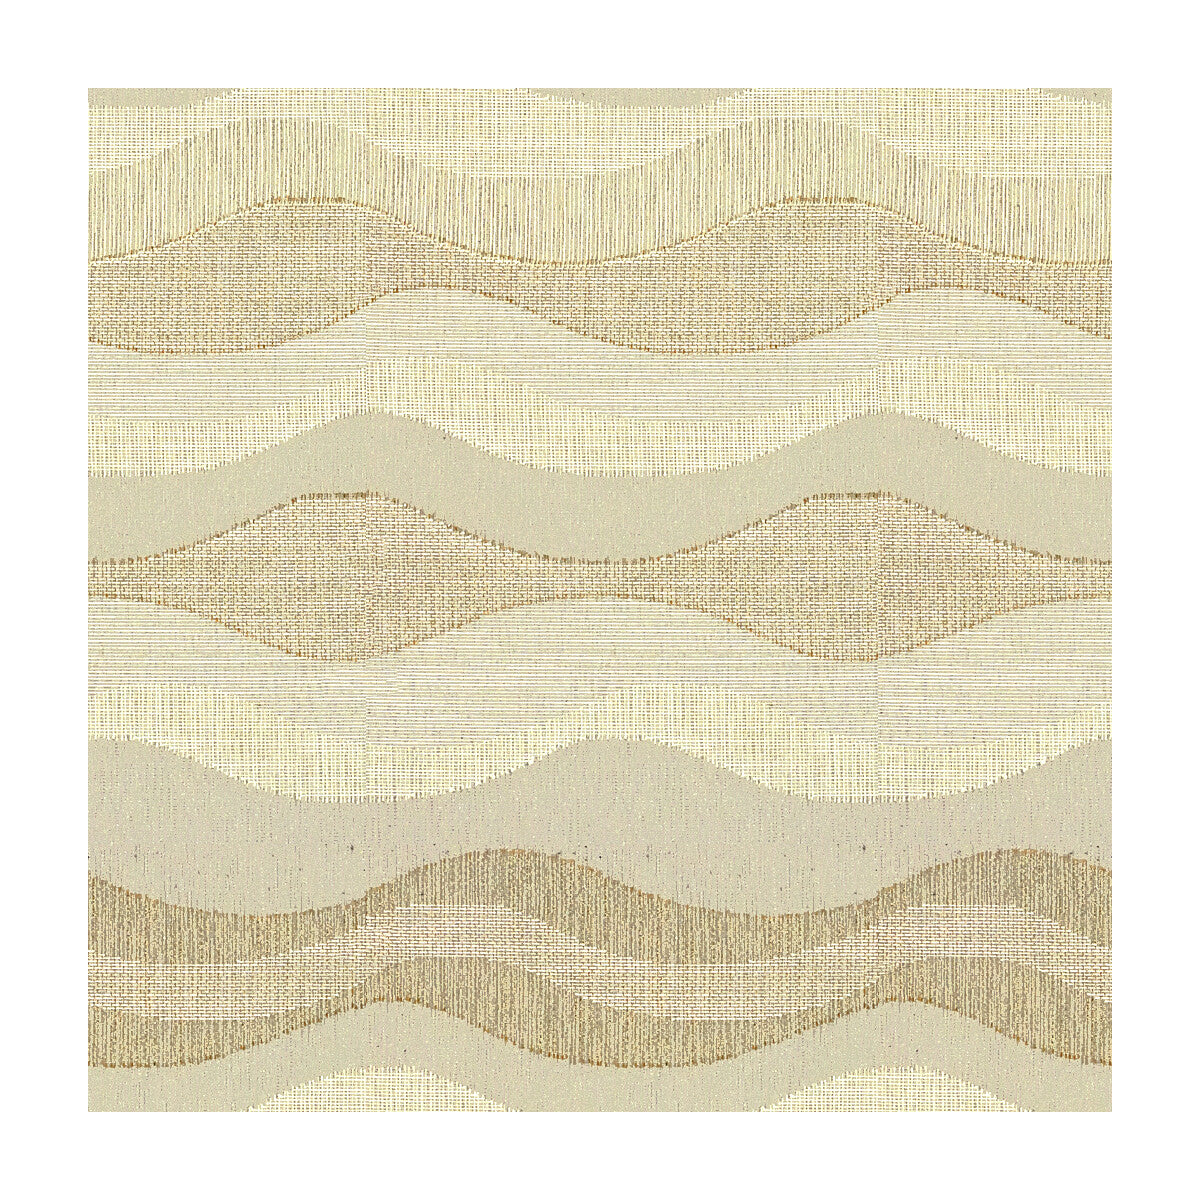 Kravet Contract fabric in 4151-1616 color - pattern 4151.1616.0 - by Kravet Contract